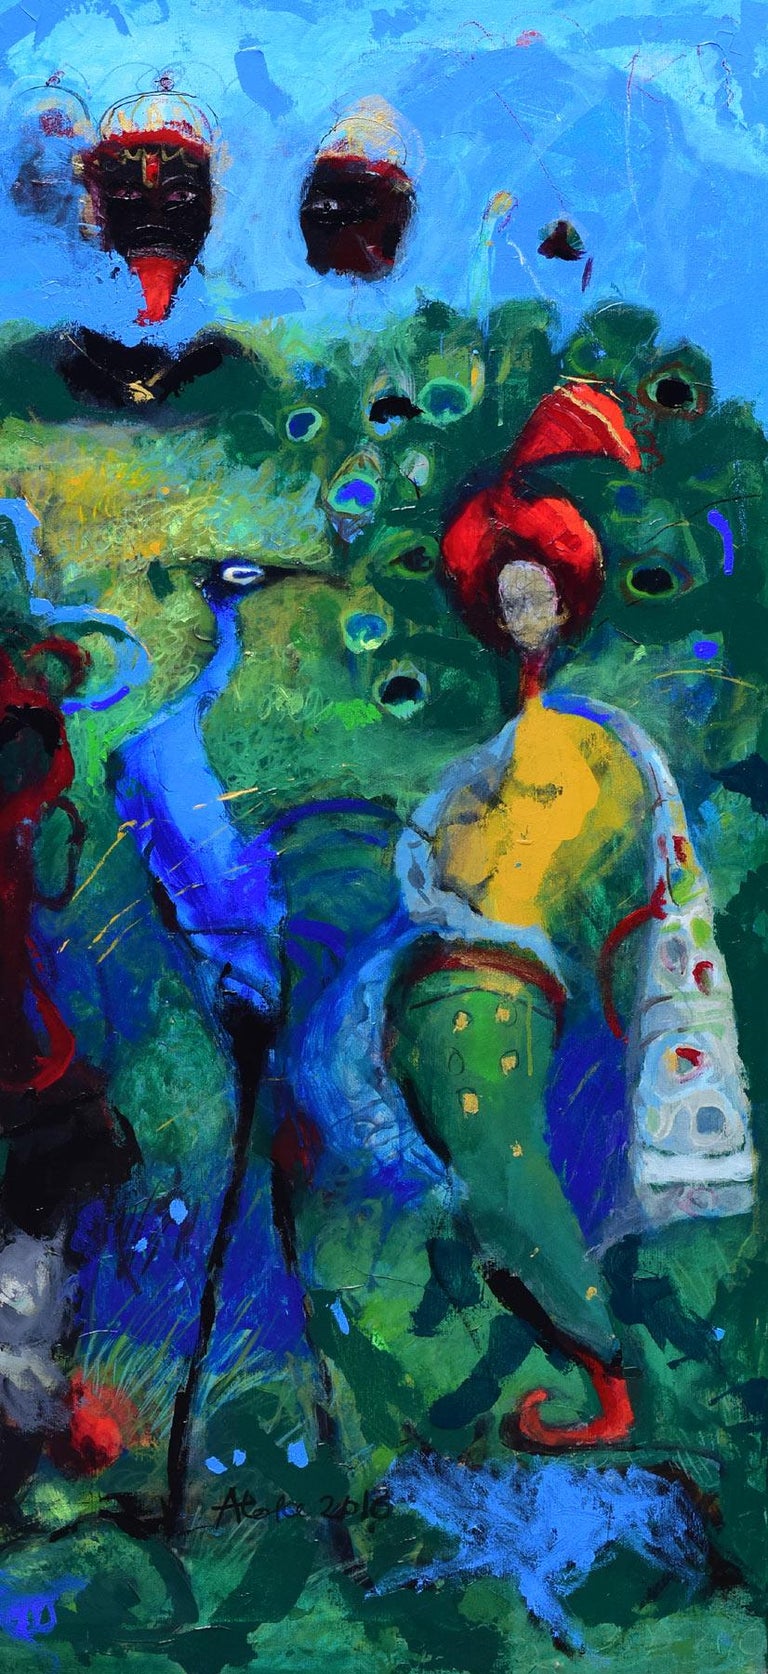 Aloke Sardar -  Untitled  - 60 x 54 inches (unframed size)
Acrylic on canvas
Inclusive of shipment in a roll form.

About the Artist and his work :
Born : Aloke Sardar is a self taught full time painter. He was born in Kolkata, 1959.

Two Men Show